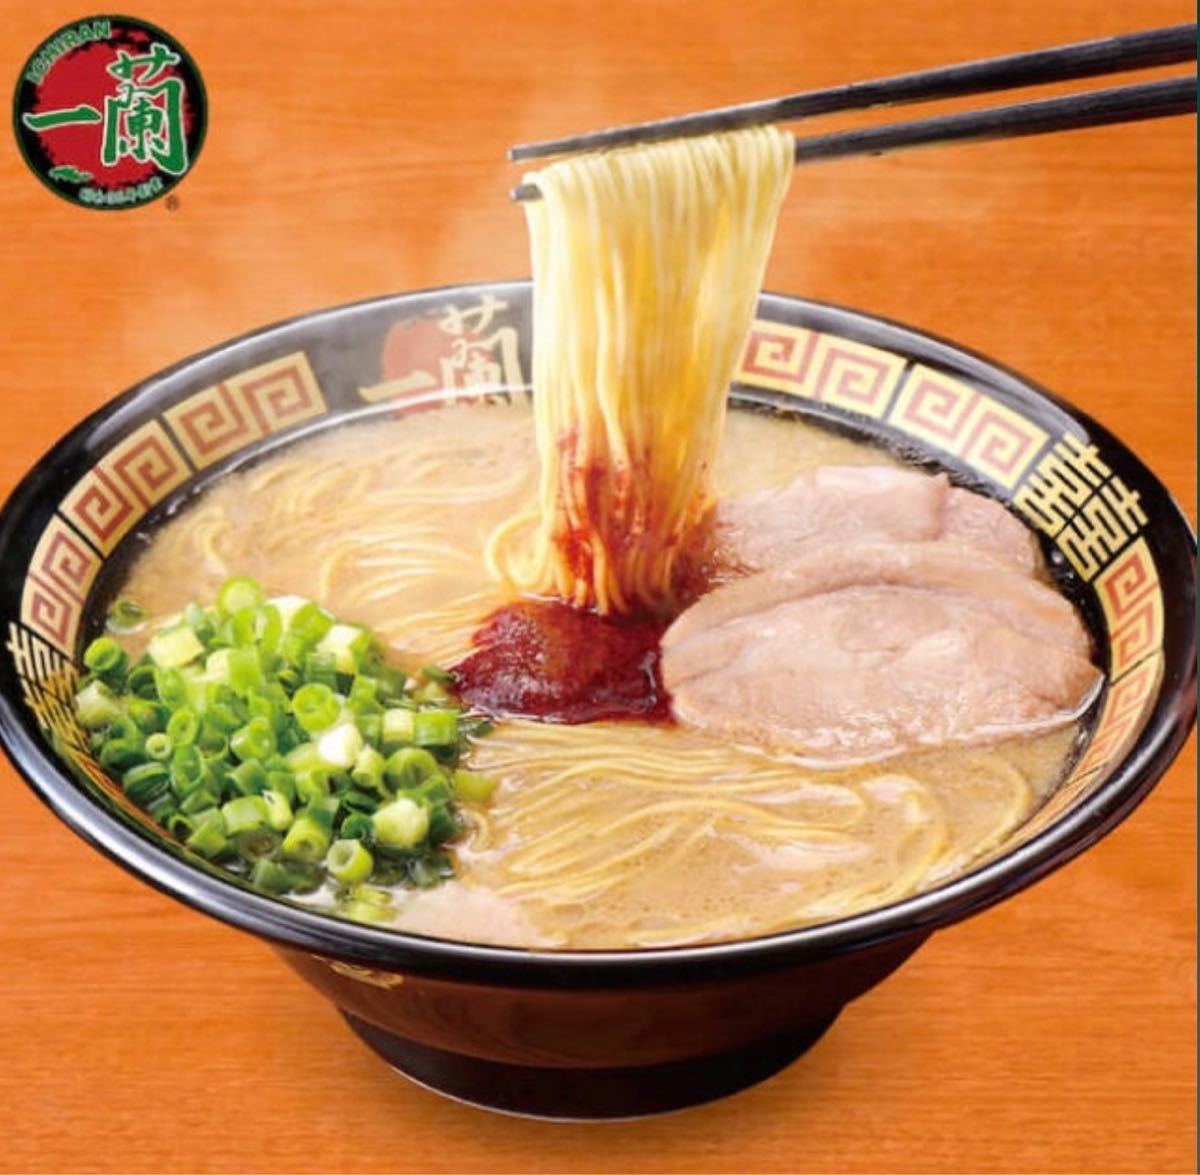  one orchid ramen 1 cup regular price 980 jpy coupon (8/31 time limit ) URL notification free coupon #1